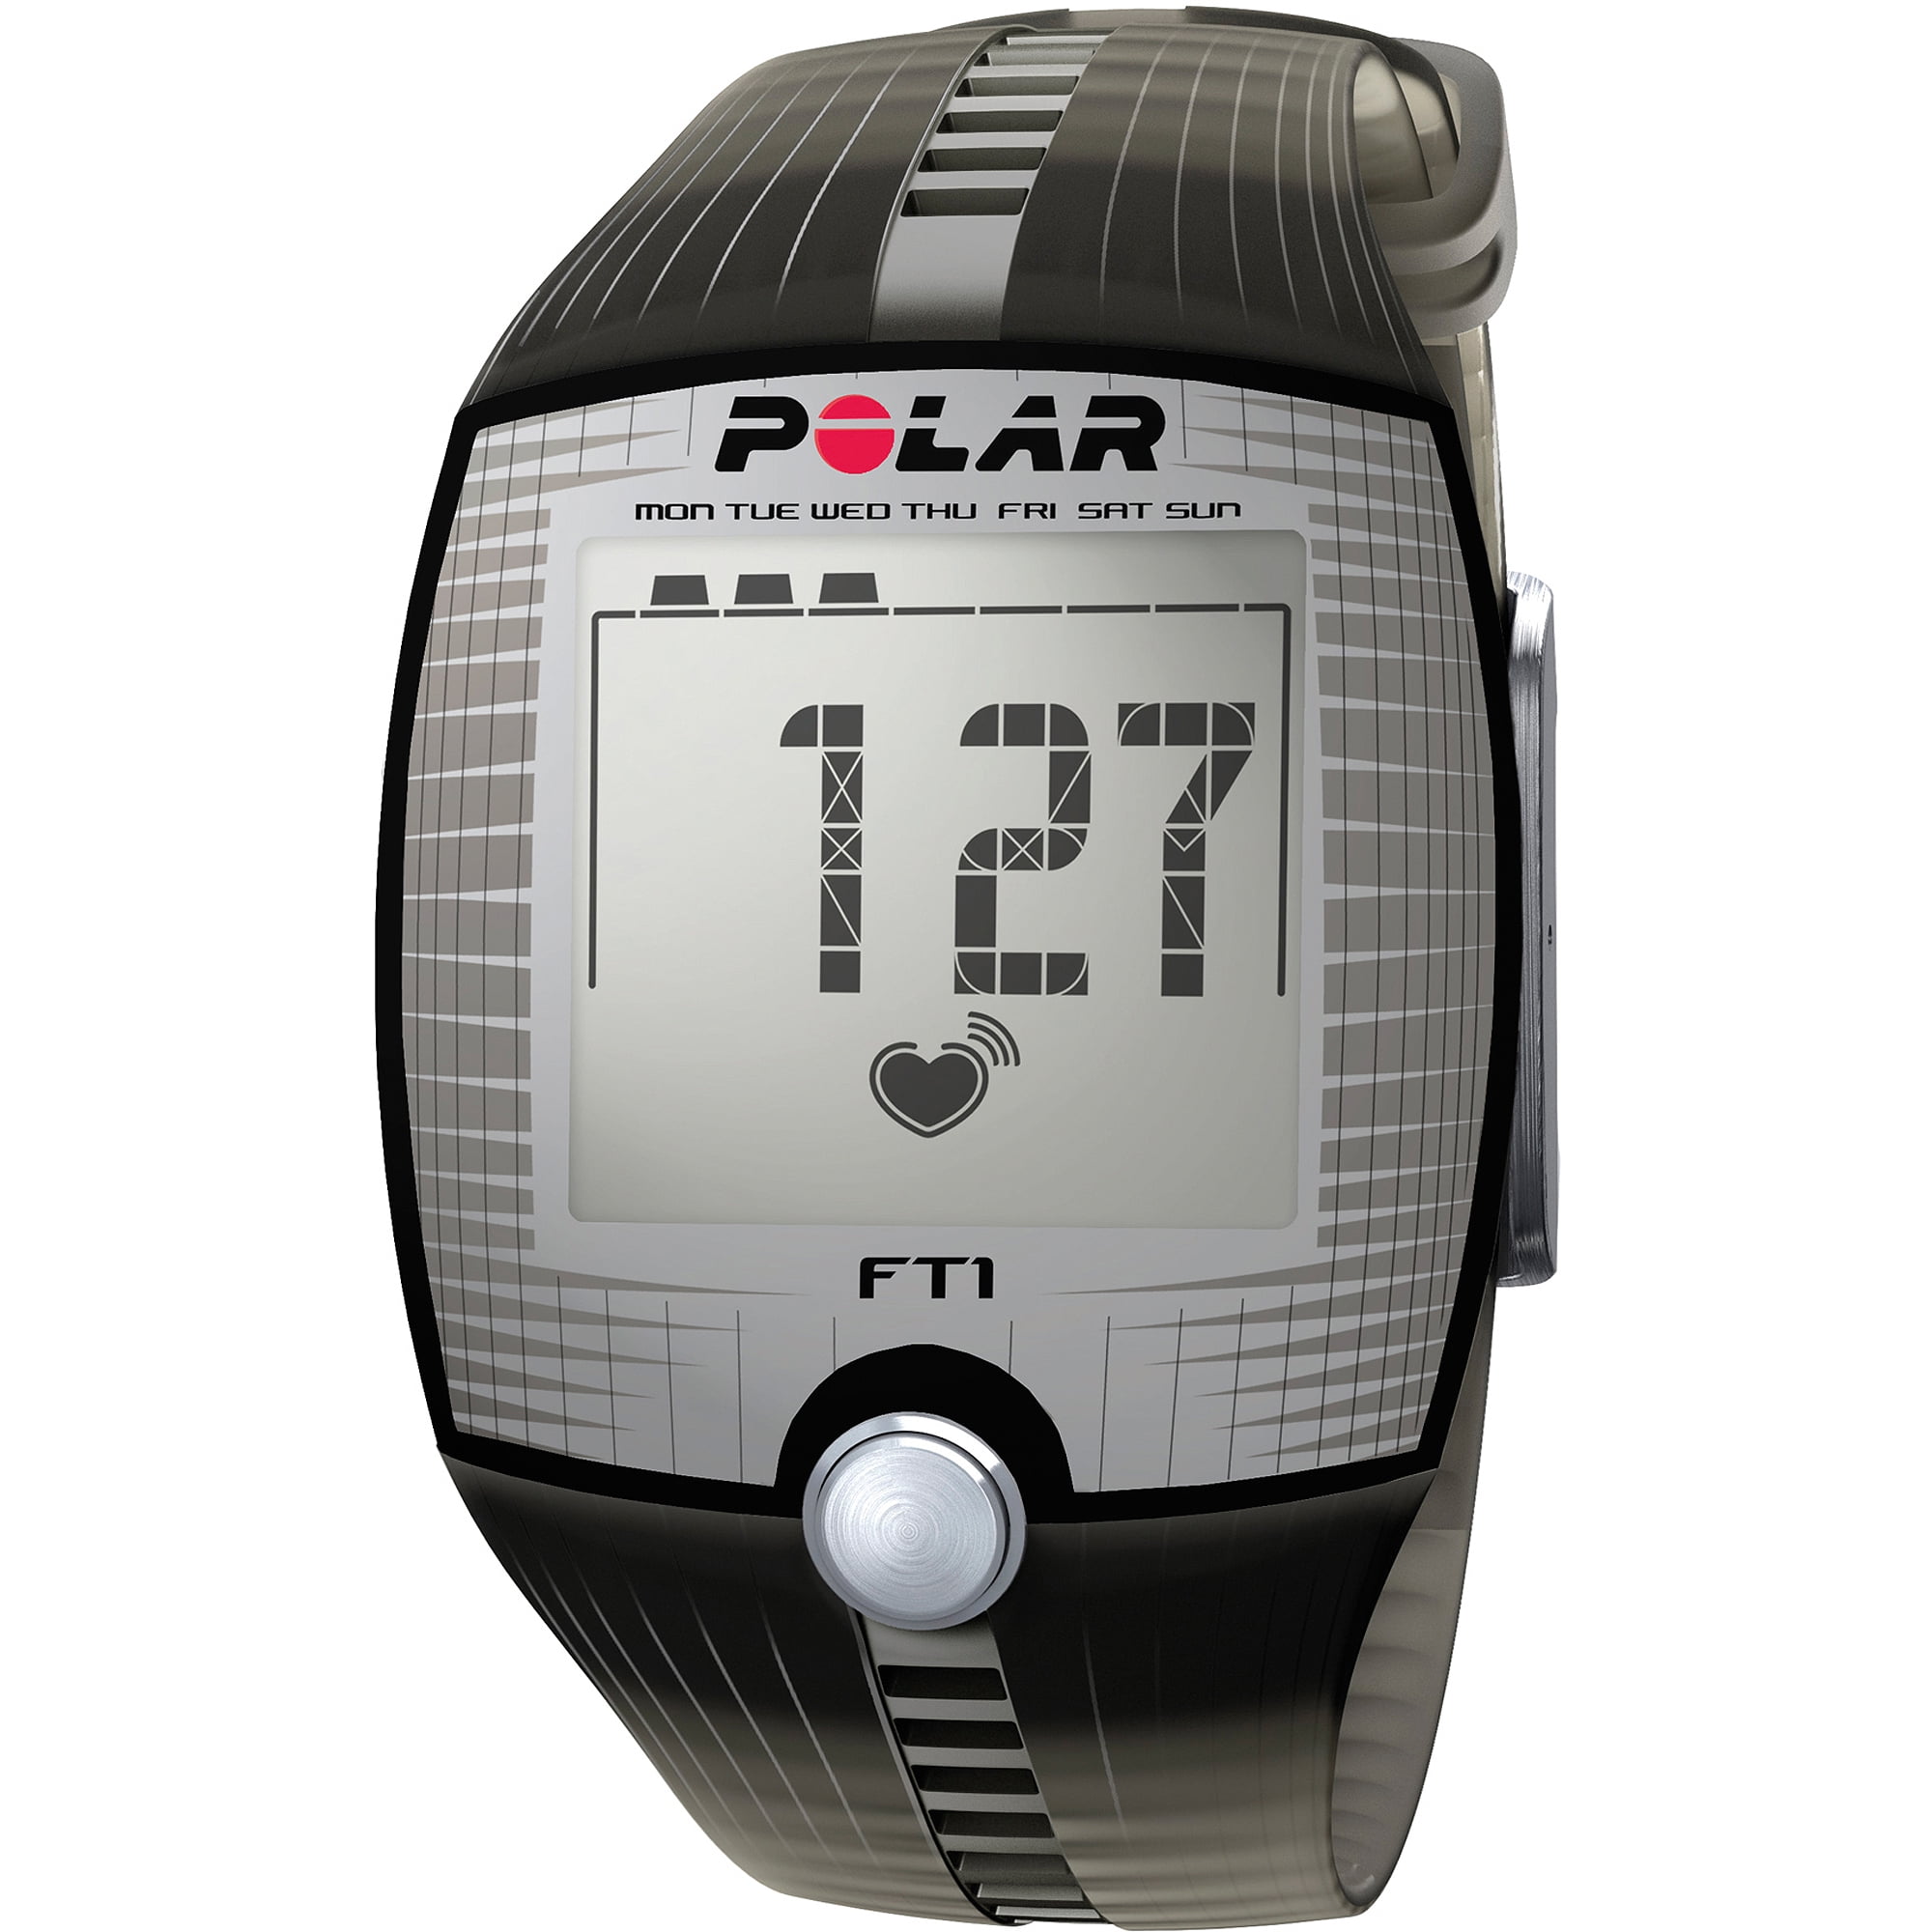 polar coded heart rate monitor